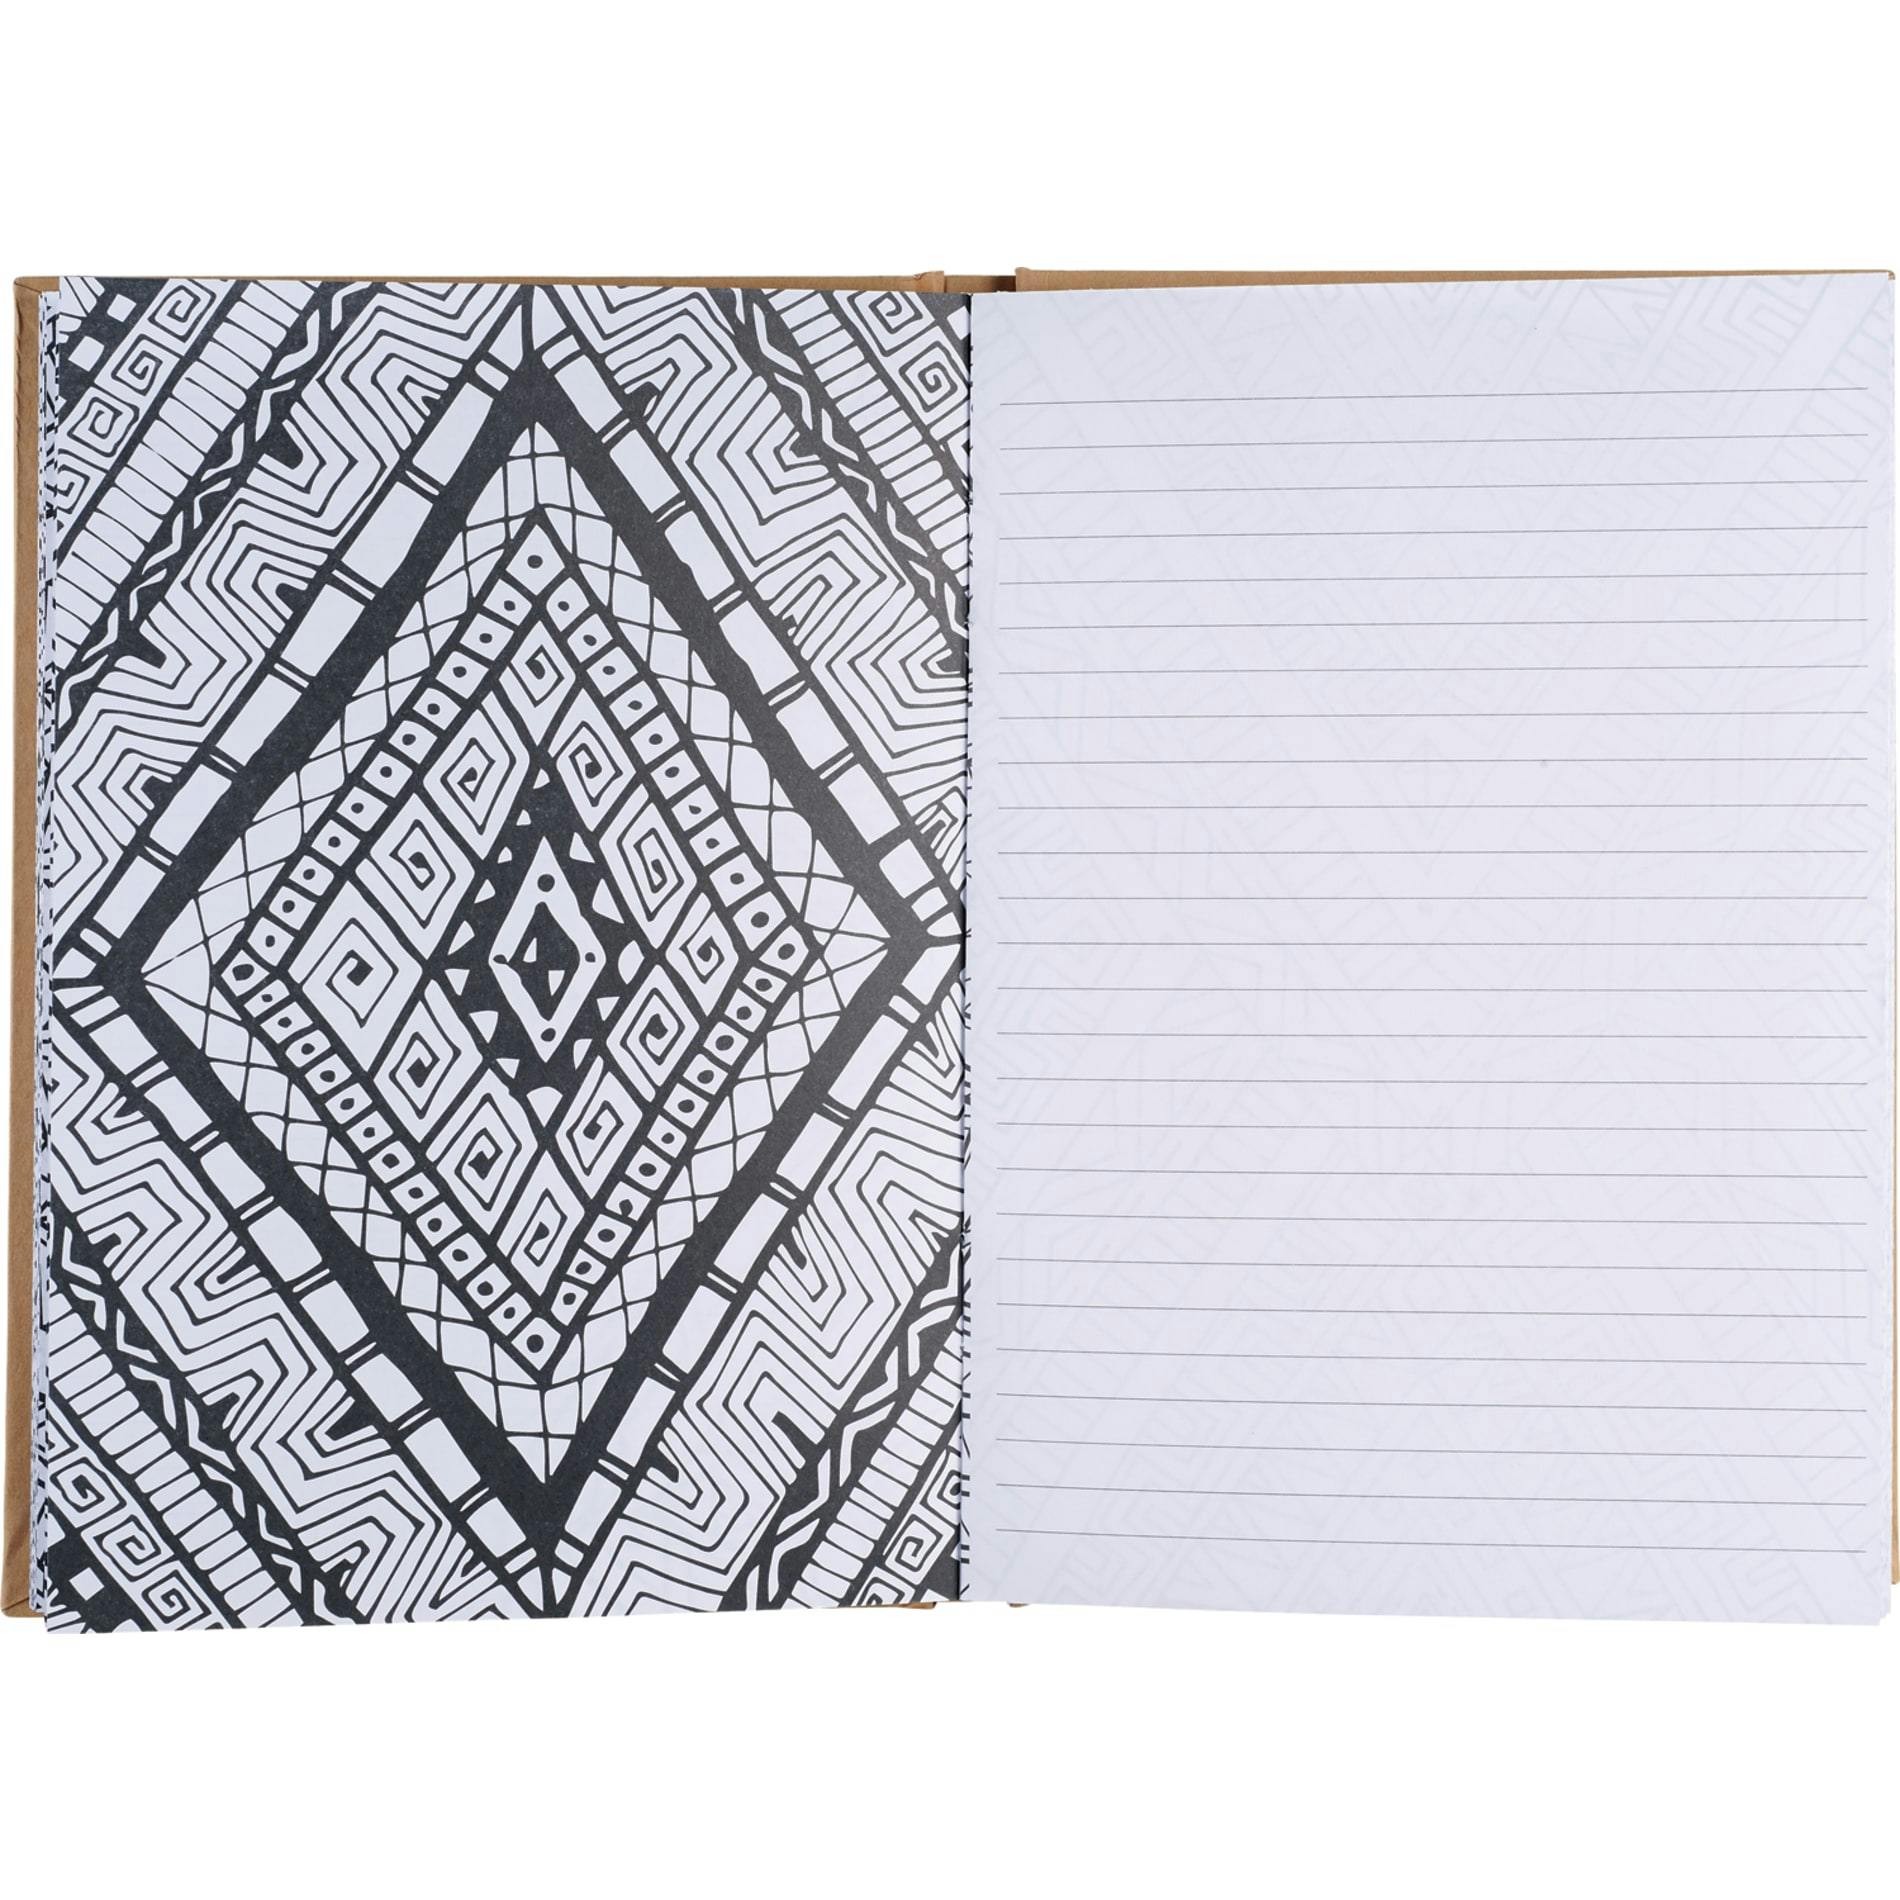 8" x 8.5" Doodle Adult Coloring Notebook - Large - additional Image 2